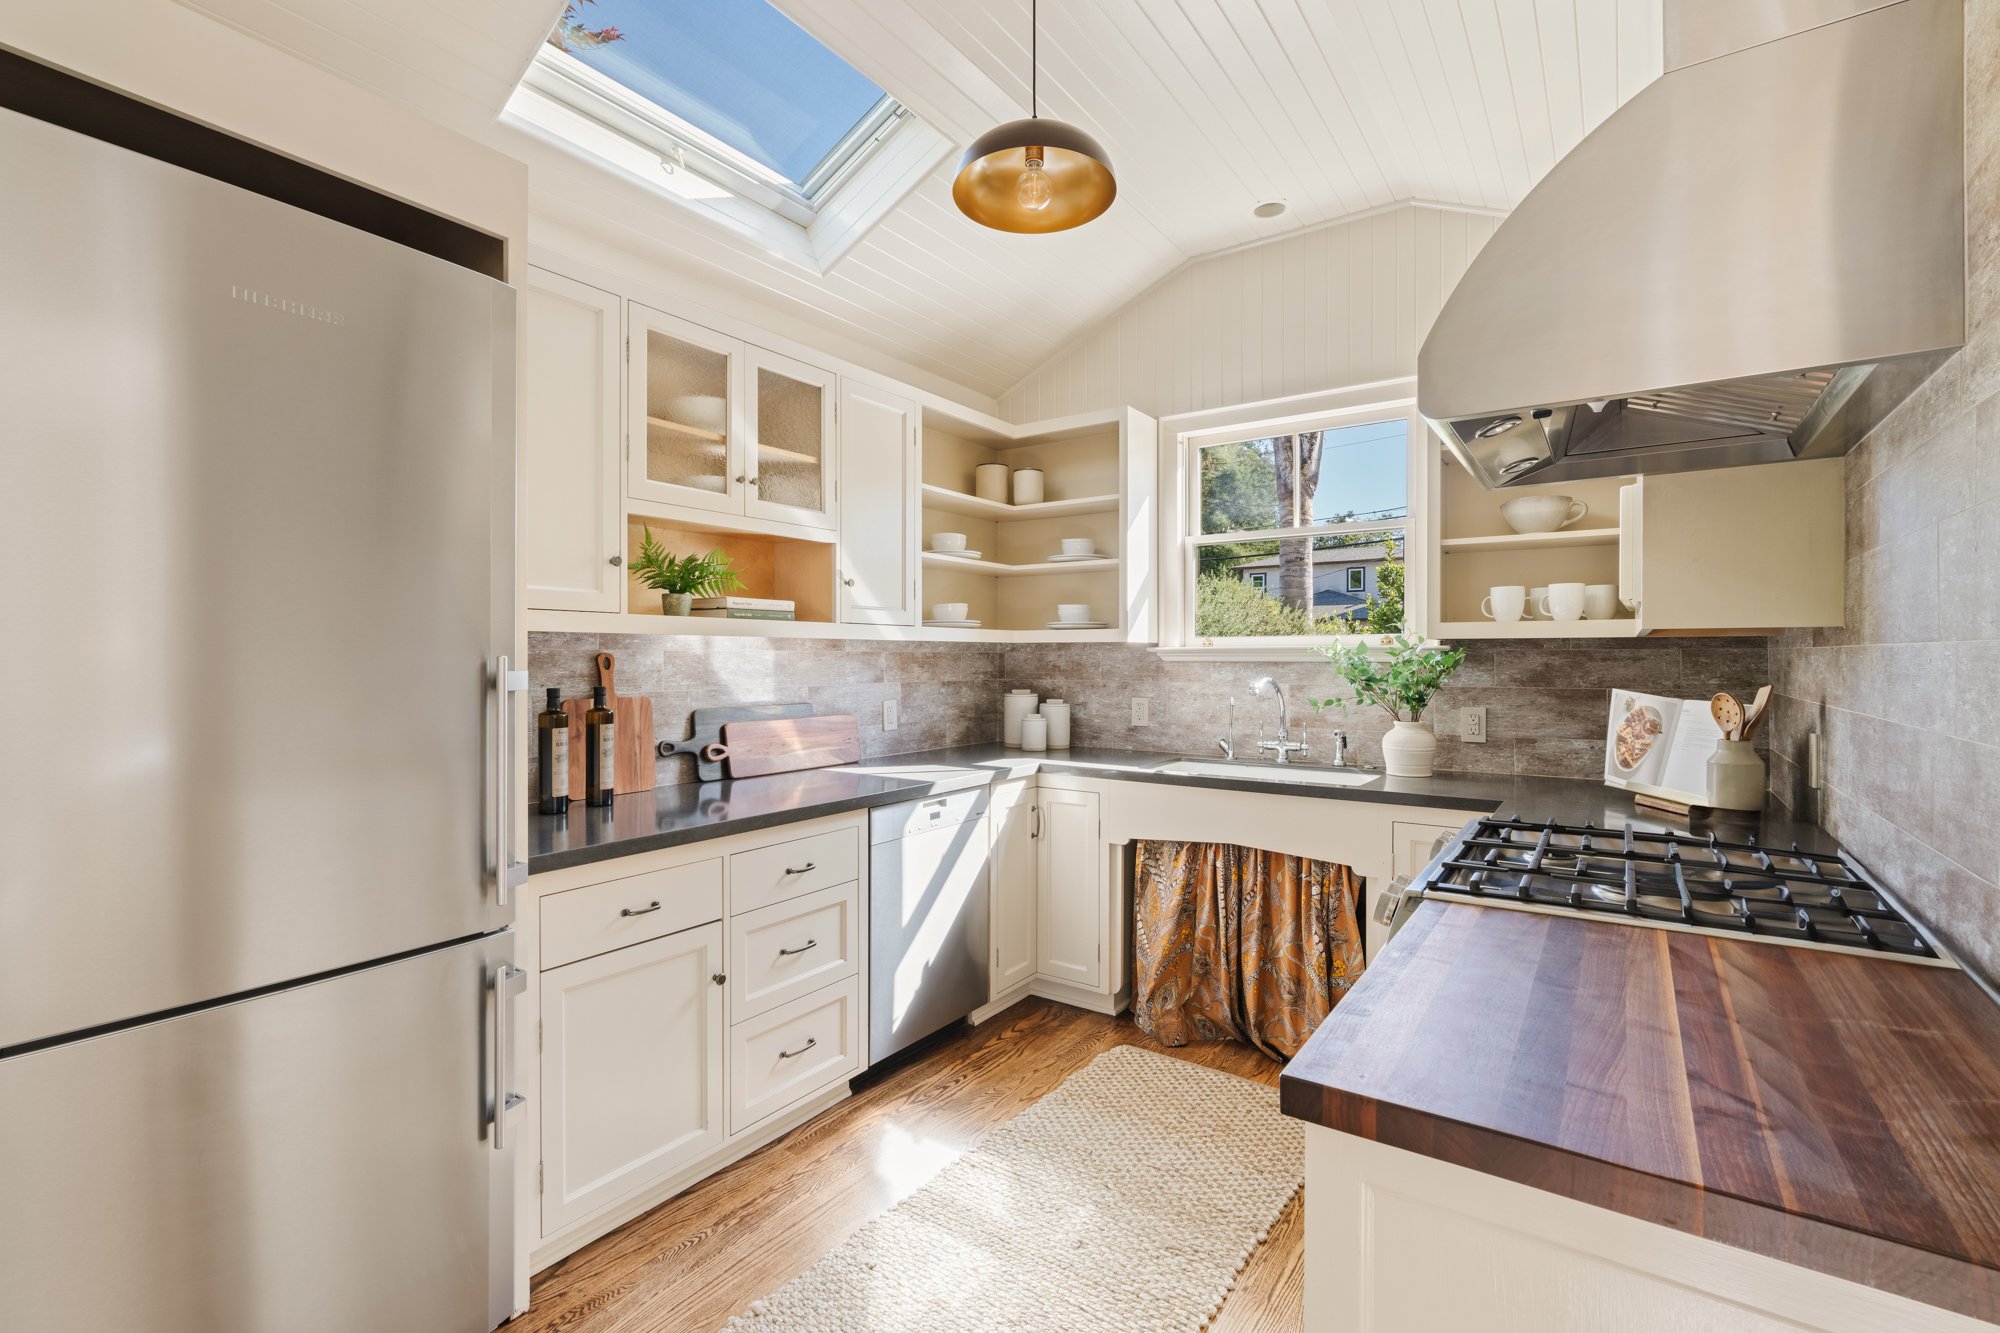 10 Washington Avenue, San Rafael Homes for Sale by Whitney Potter at Own Marin Real Estate-19.jpg